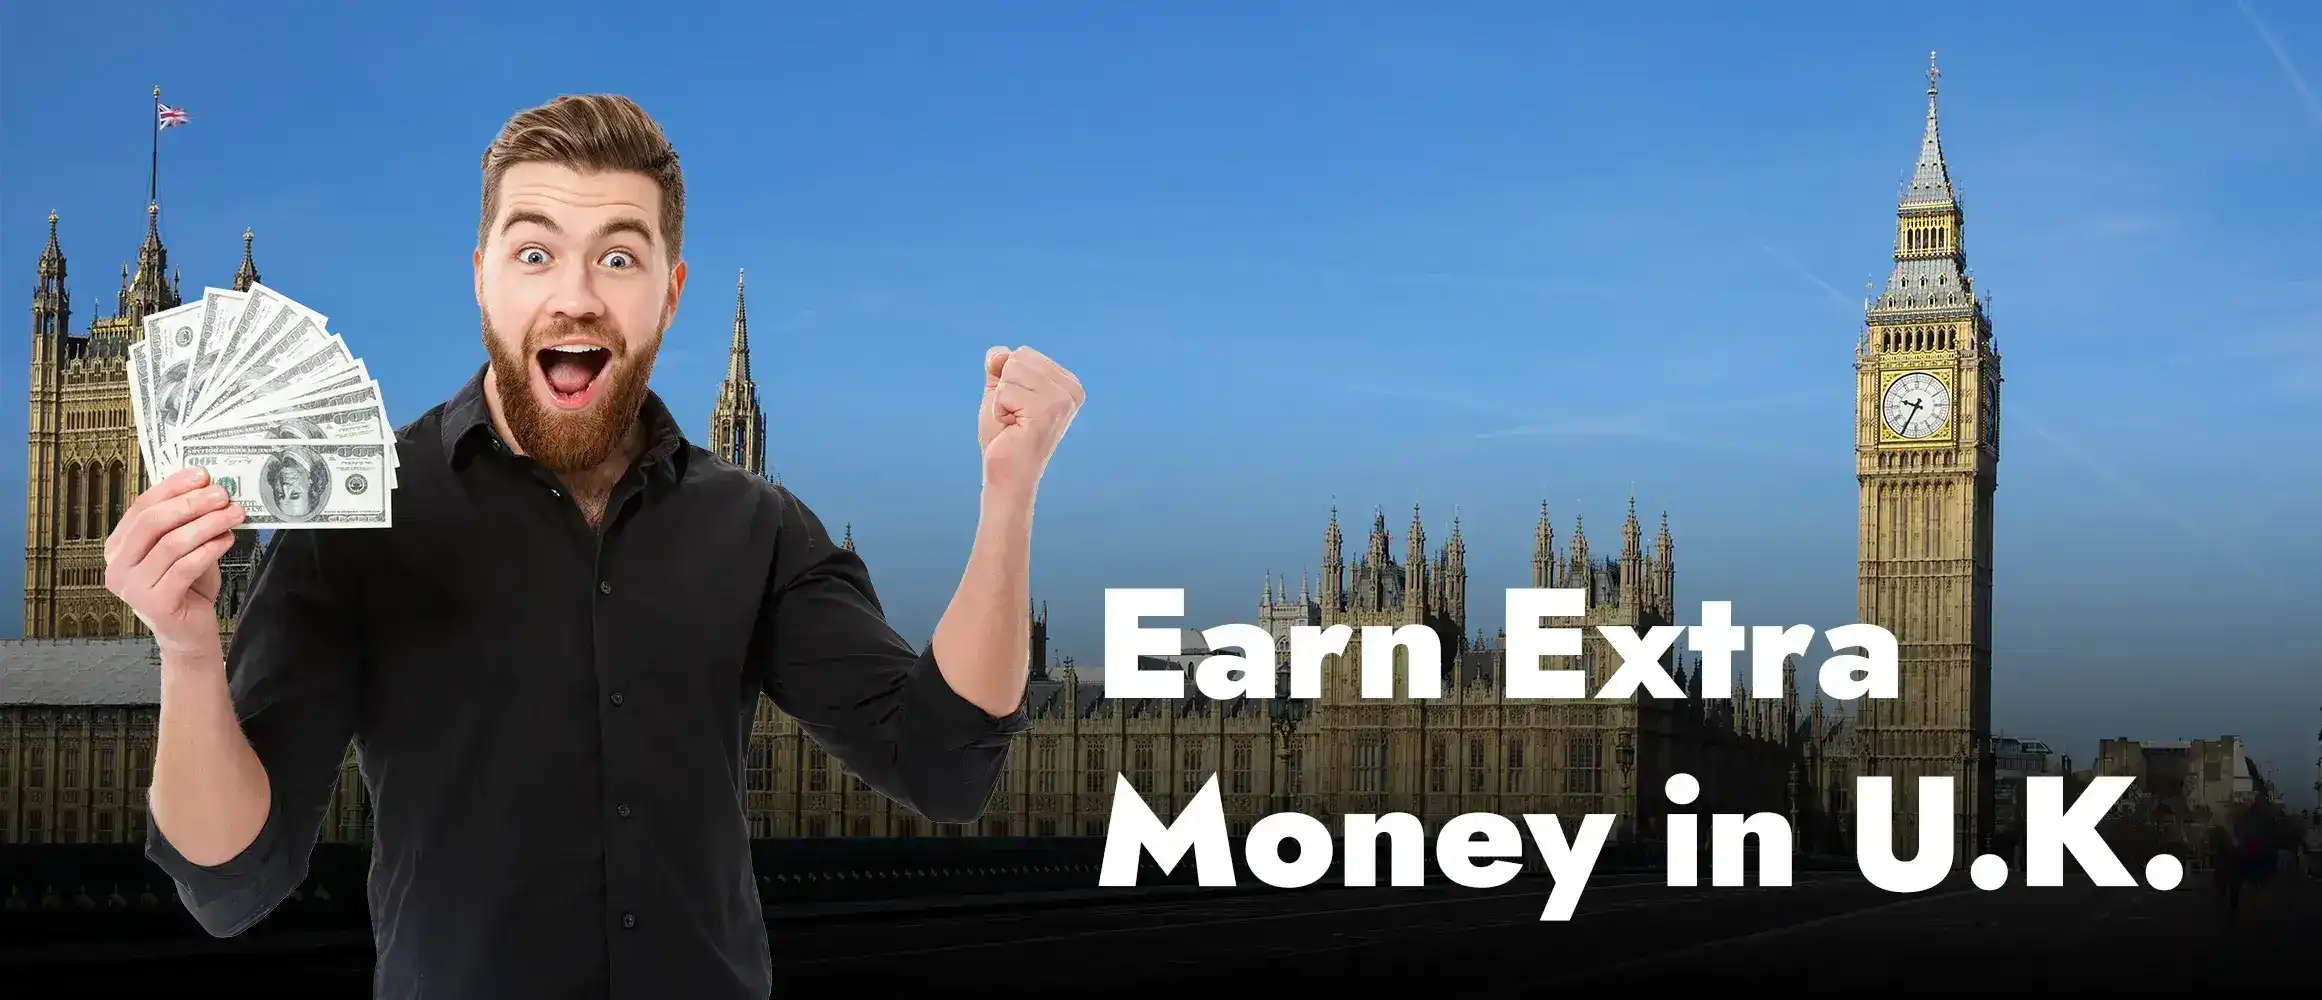 How can an International Student Earn Extra Money in the UK